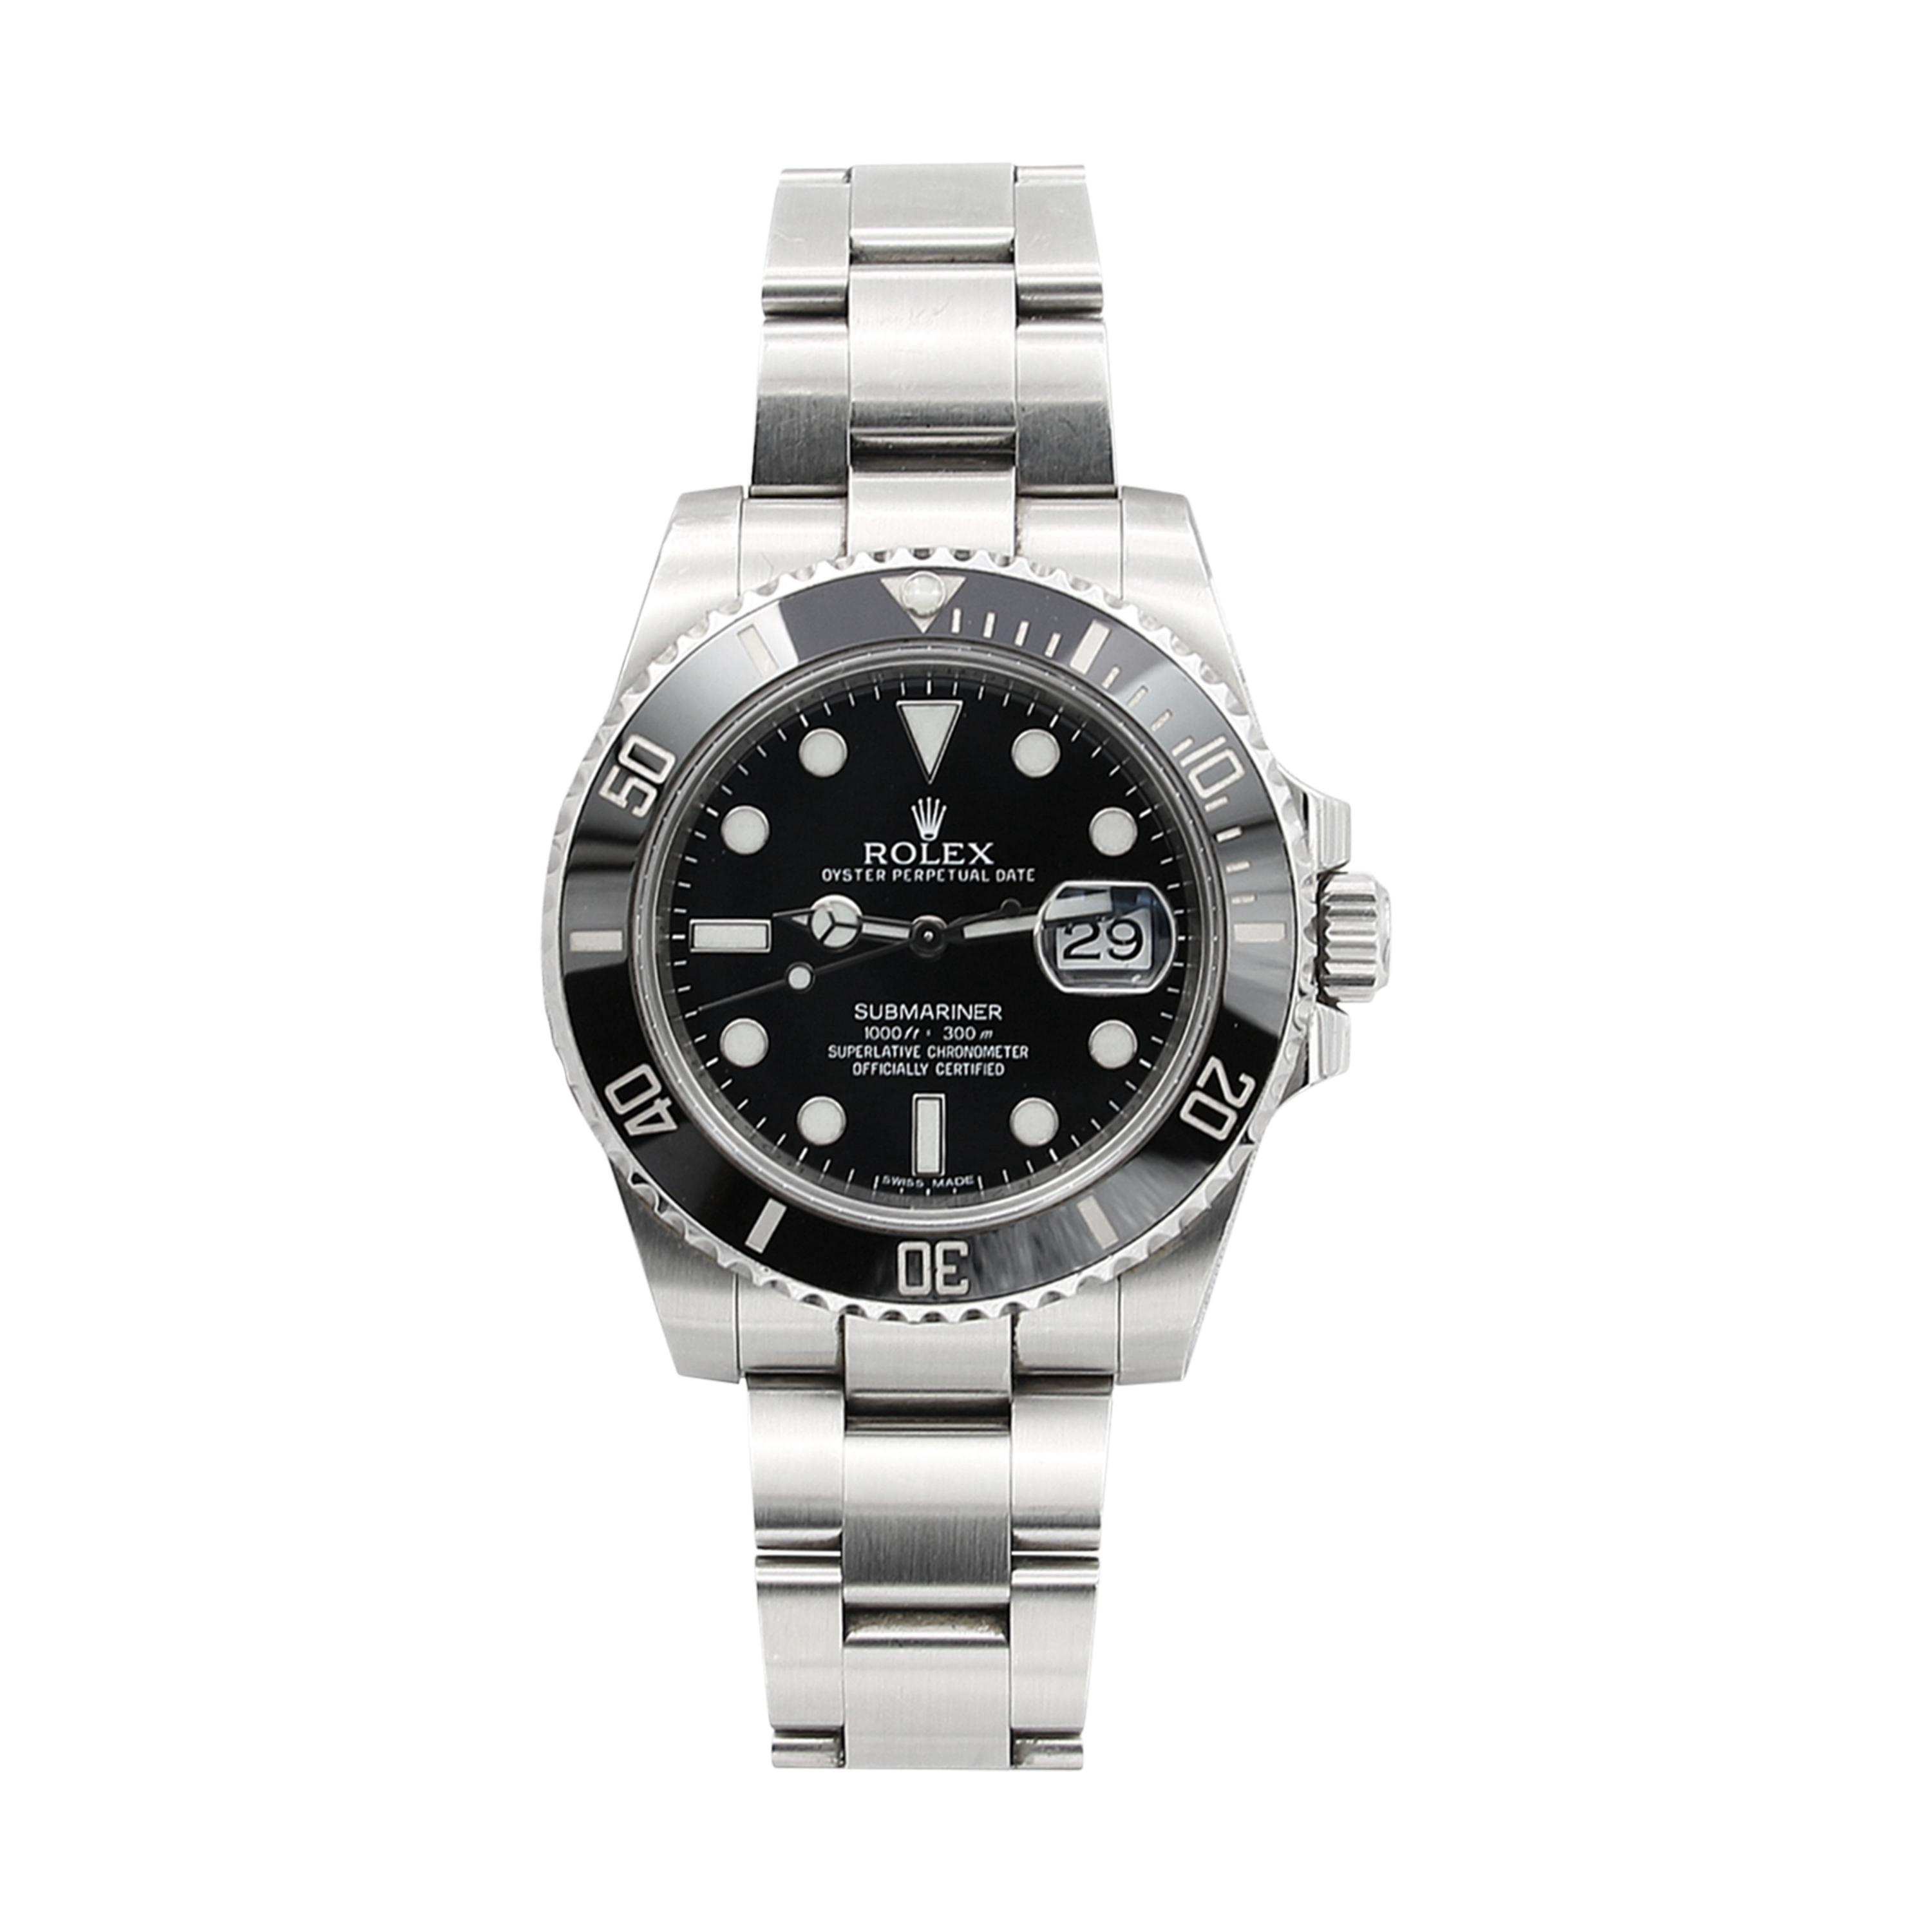 Preowned Rolex Submariner Black Dial 116610LN - Global Watch Shop